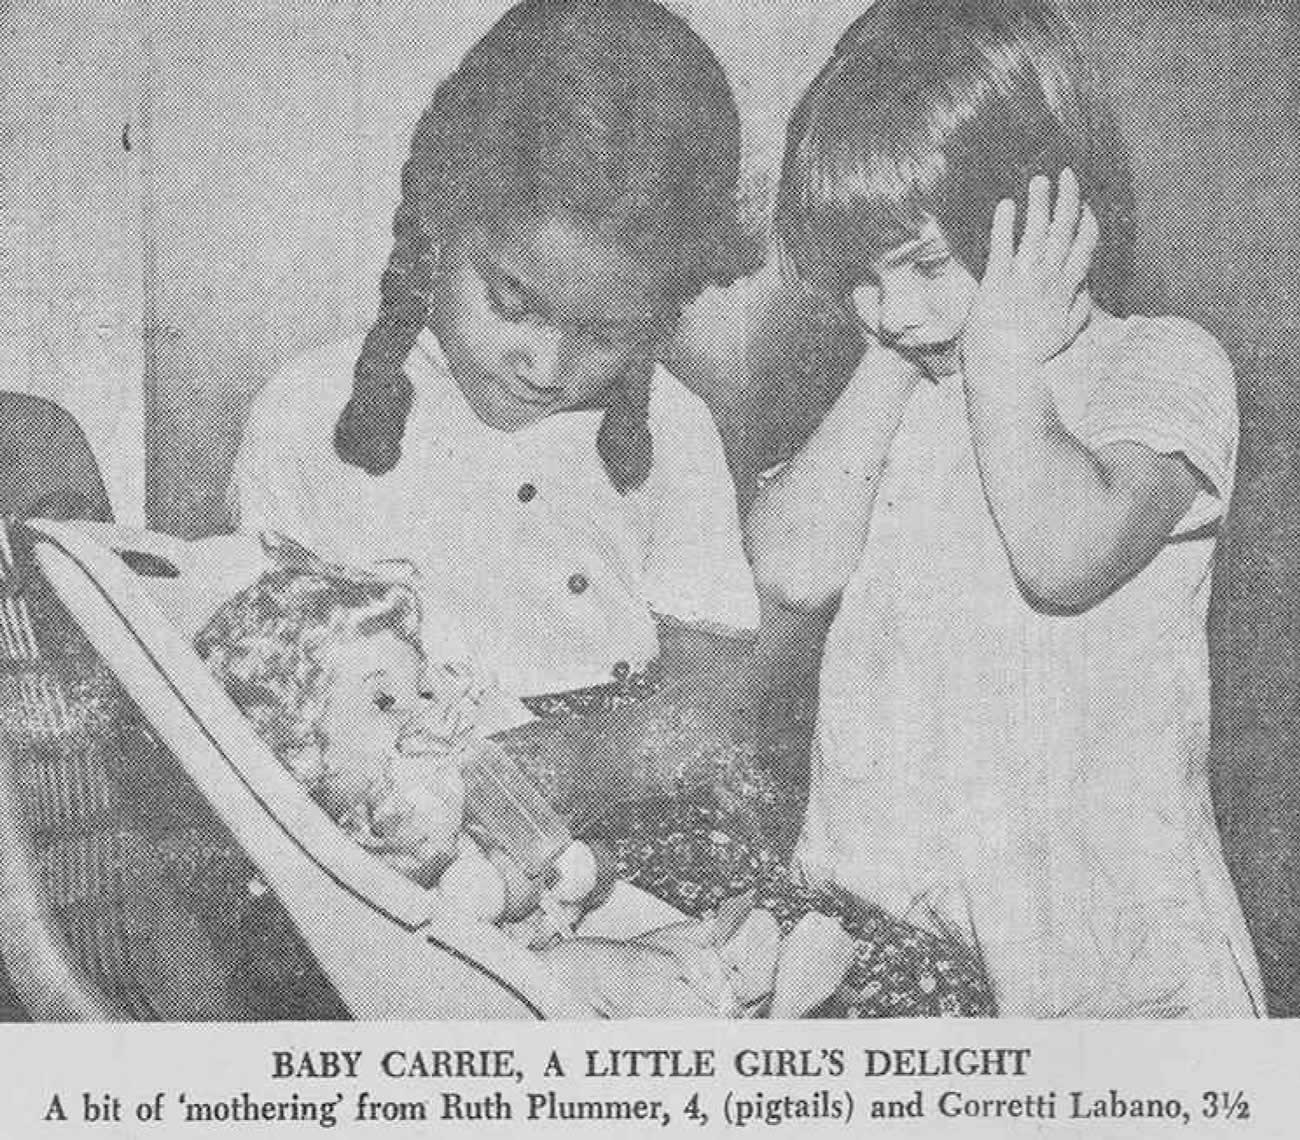 Two little girls looking at a doll with excitement.